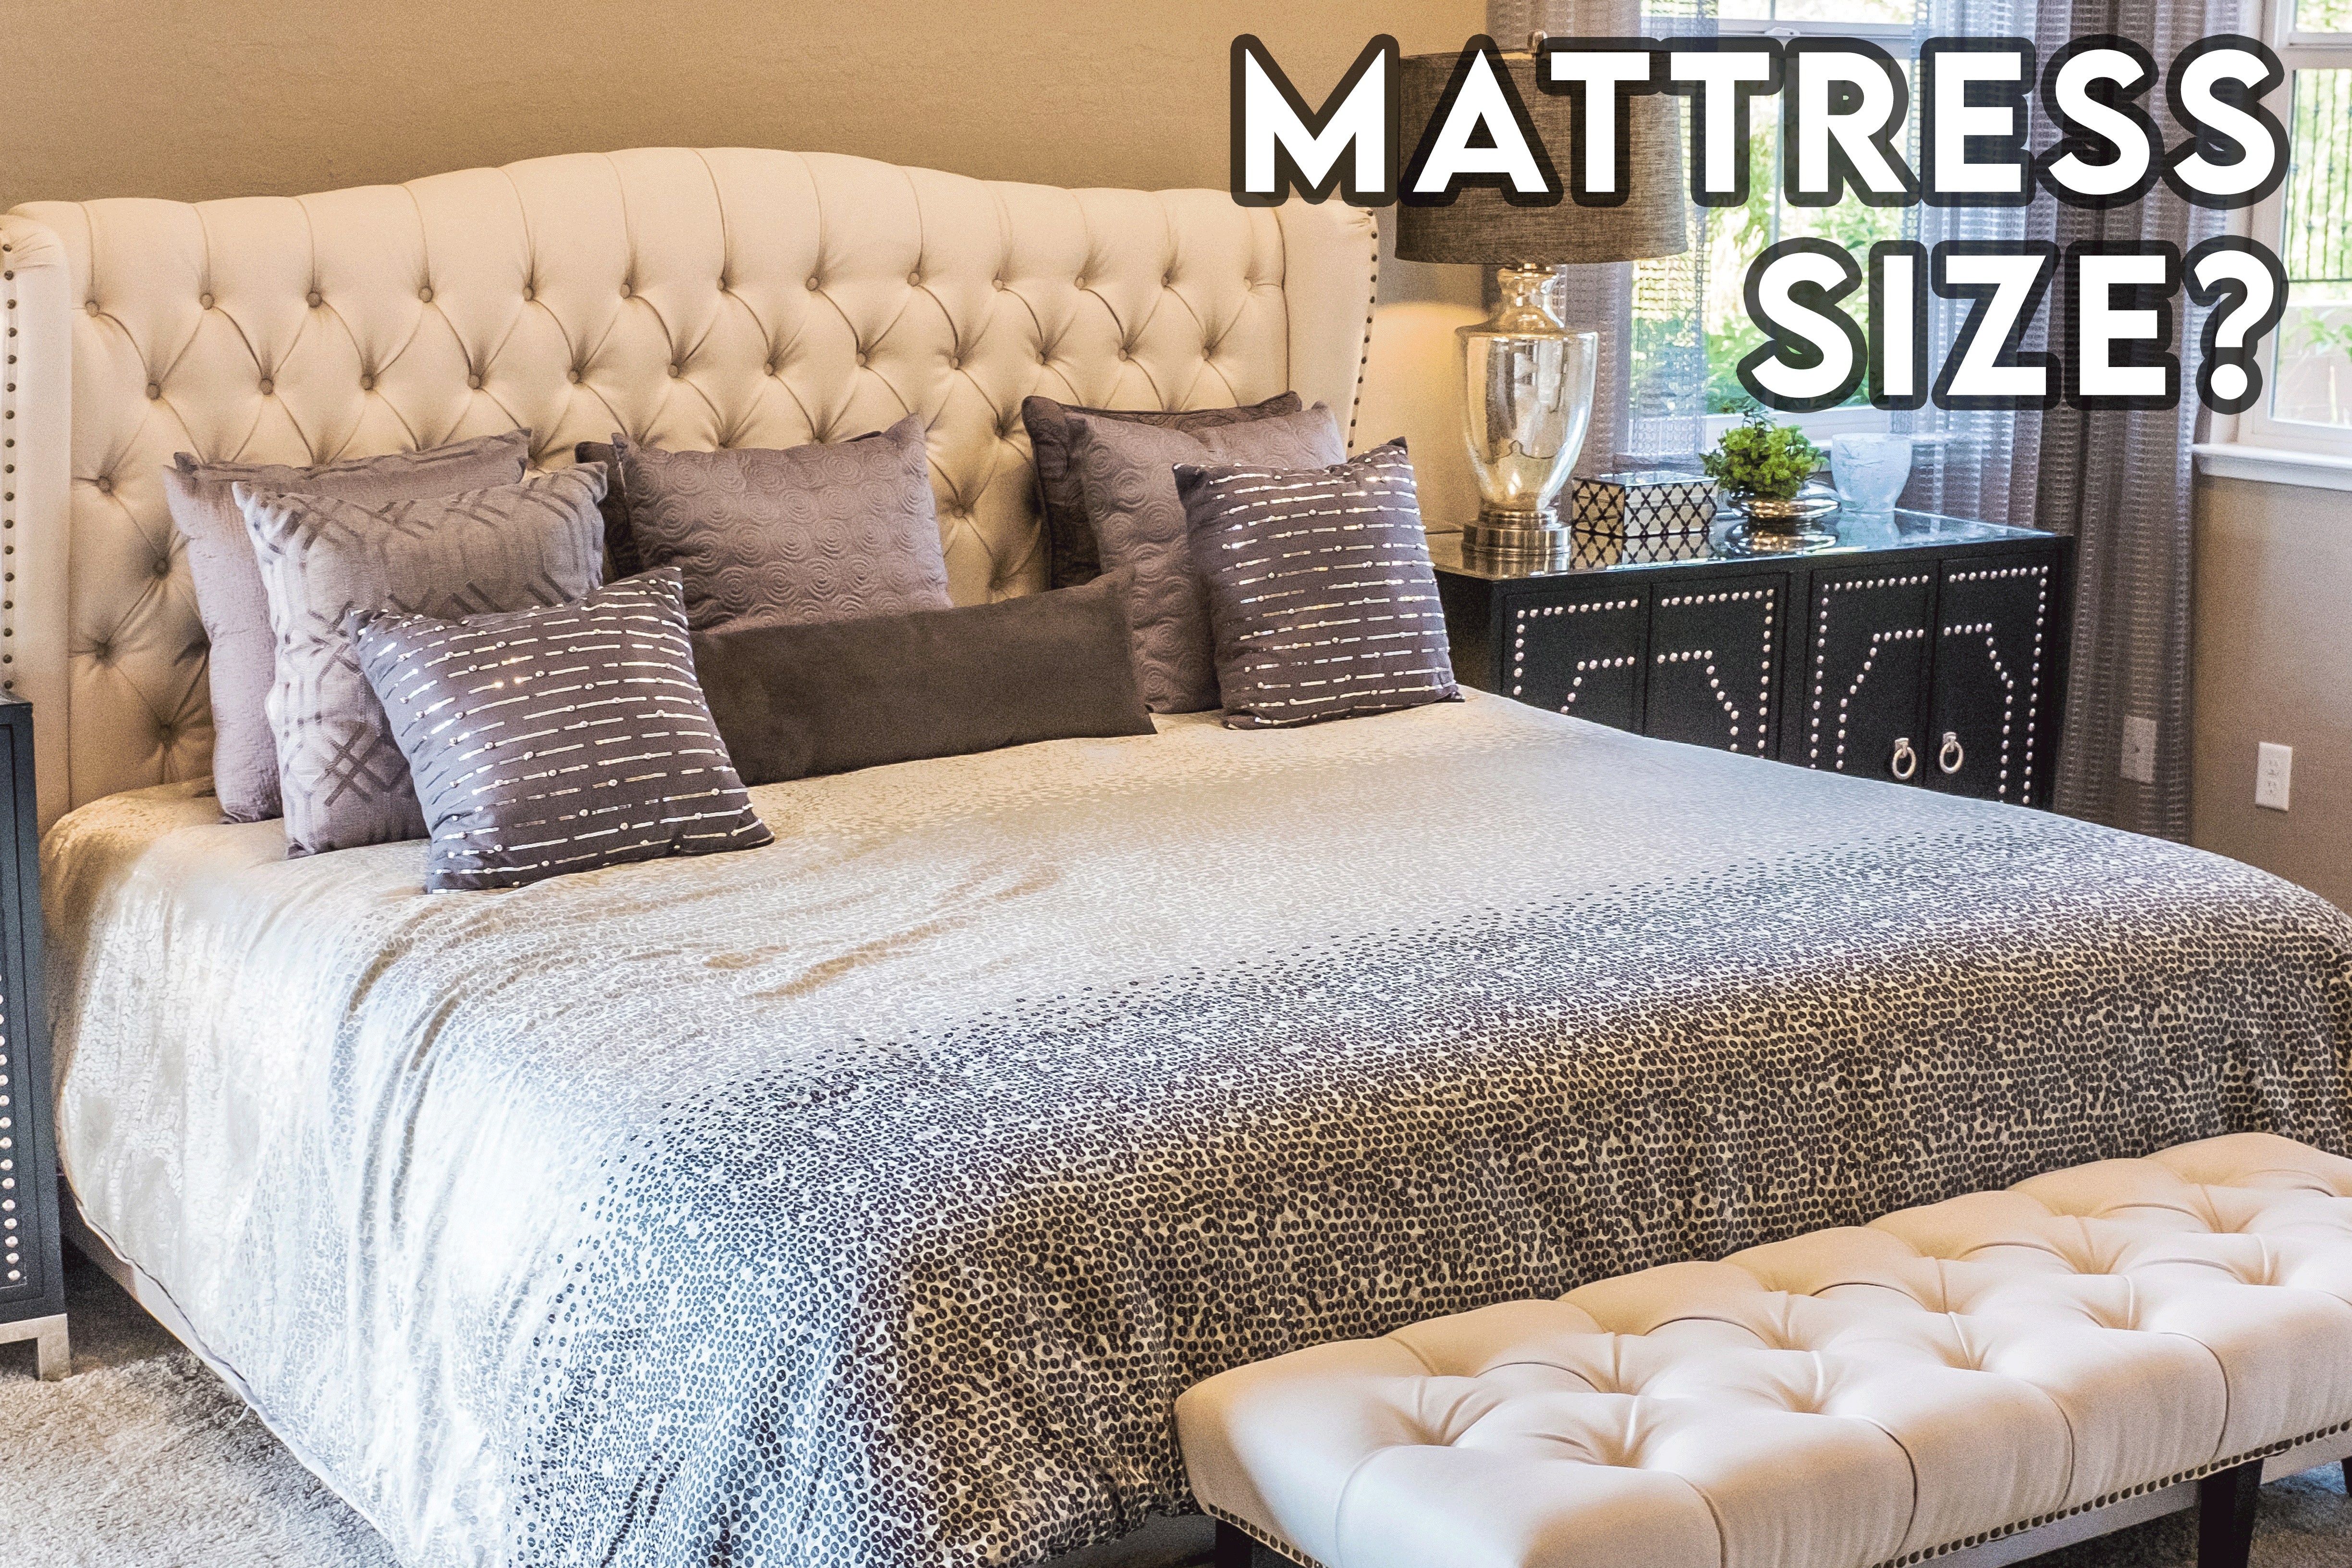 What Size Mattress Fits in a King-Size Waterbed Frame?